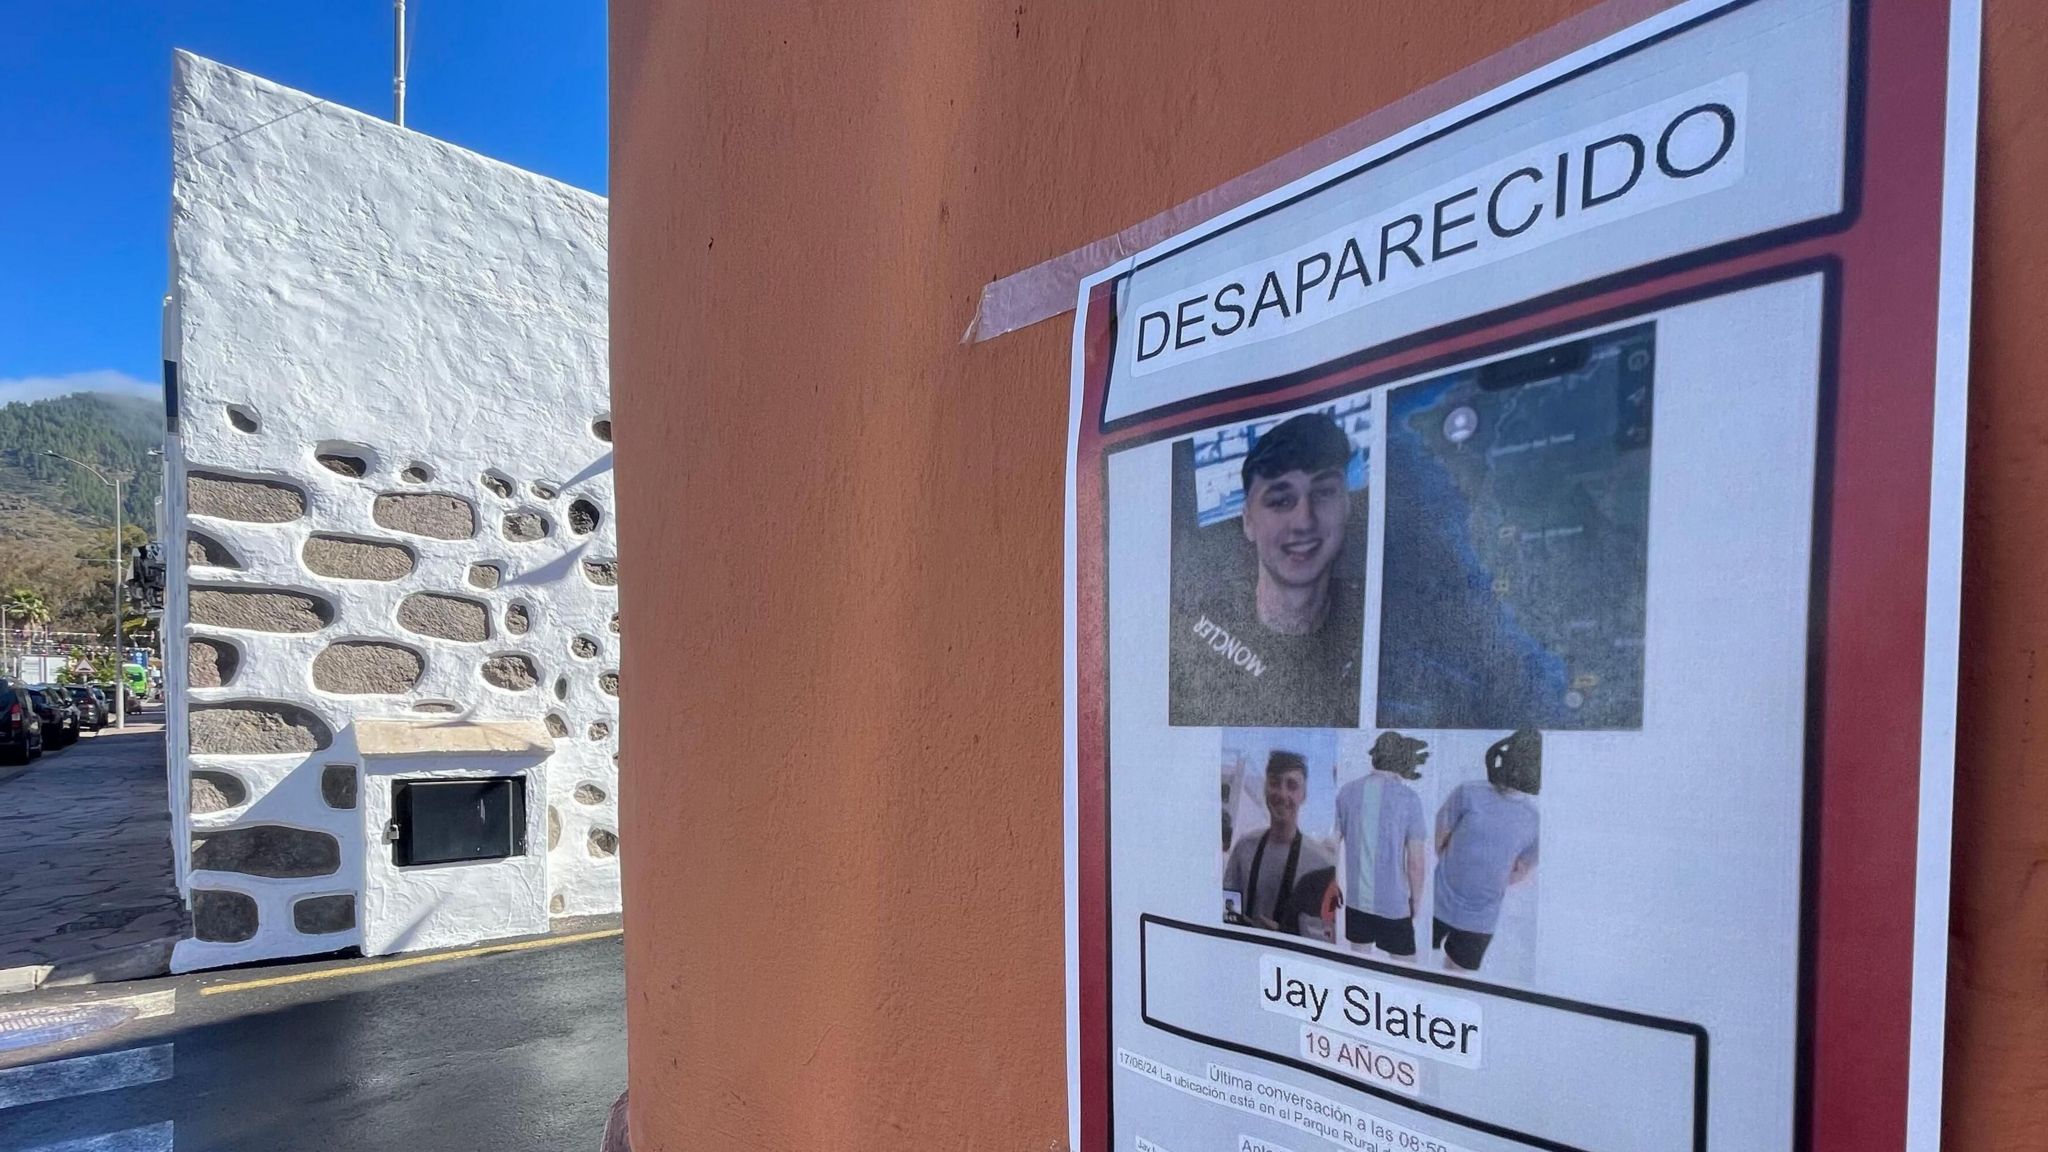 A missing poster on the wall of an orange building